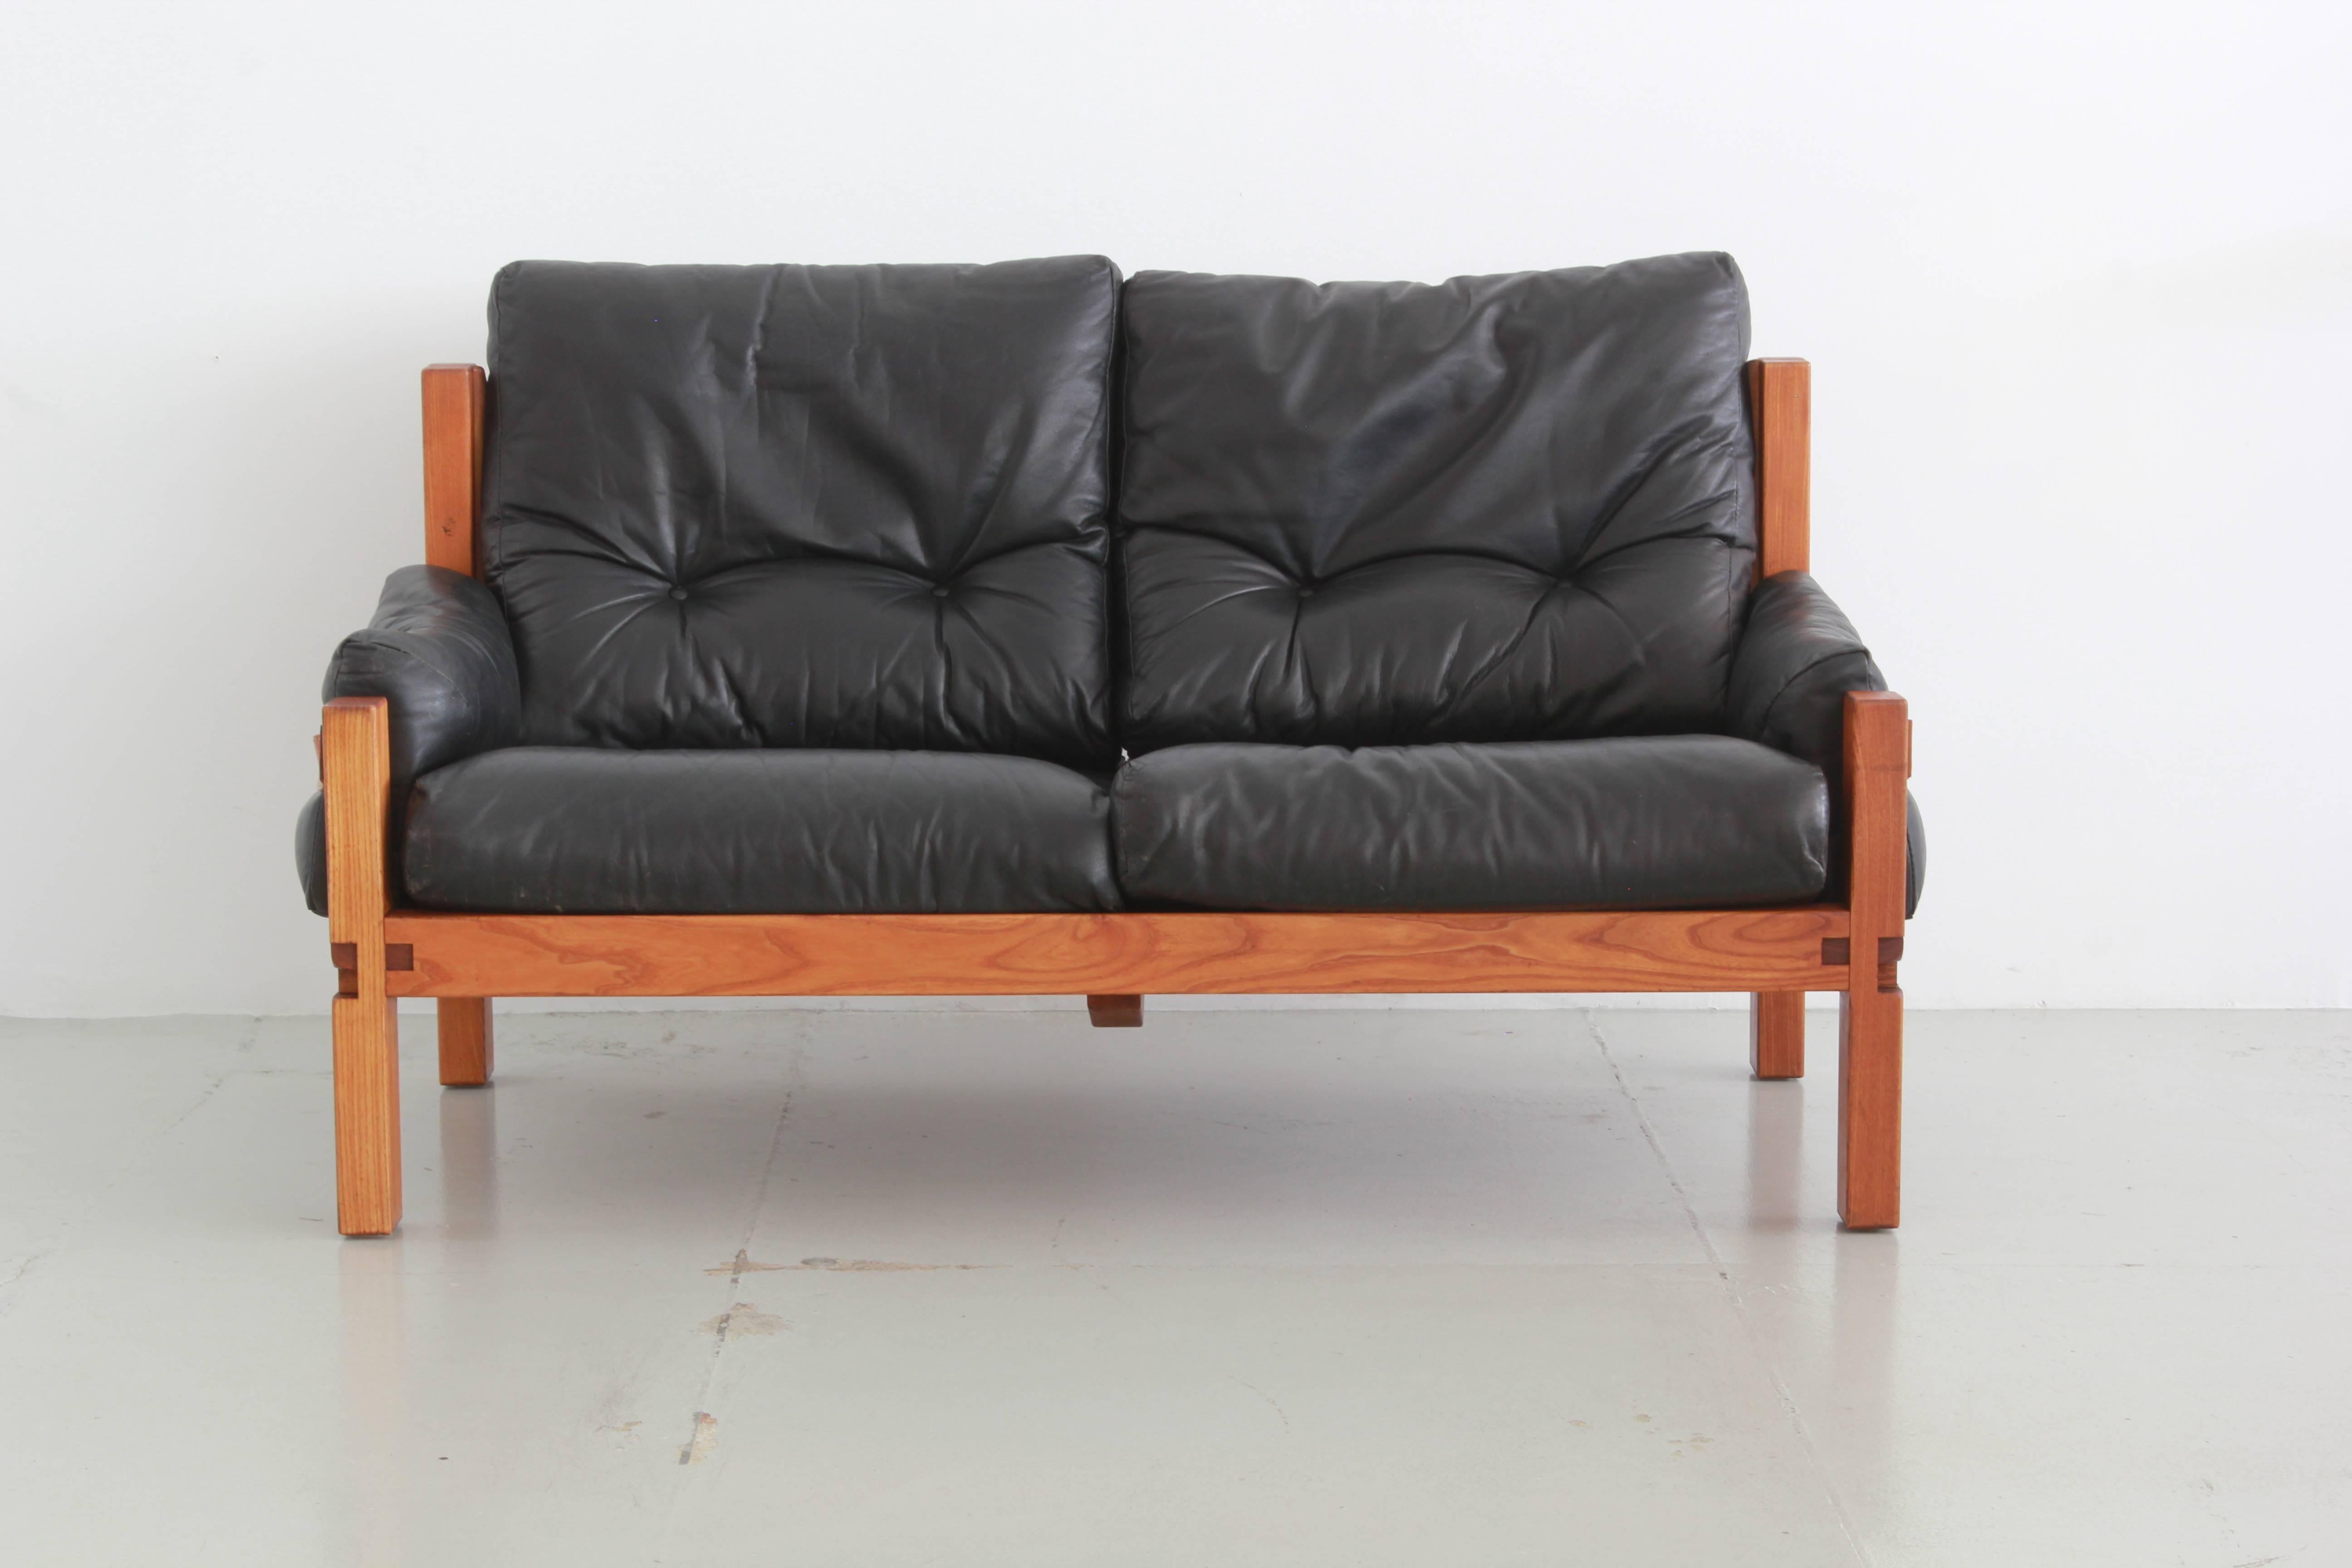 Two-seat sofa by Pierre Chapo. Solid elm and black leather with contrasting cognac leather side straps.
Vintage patina to leather - super soft. 